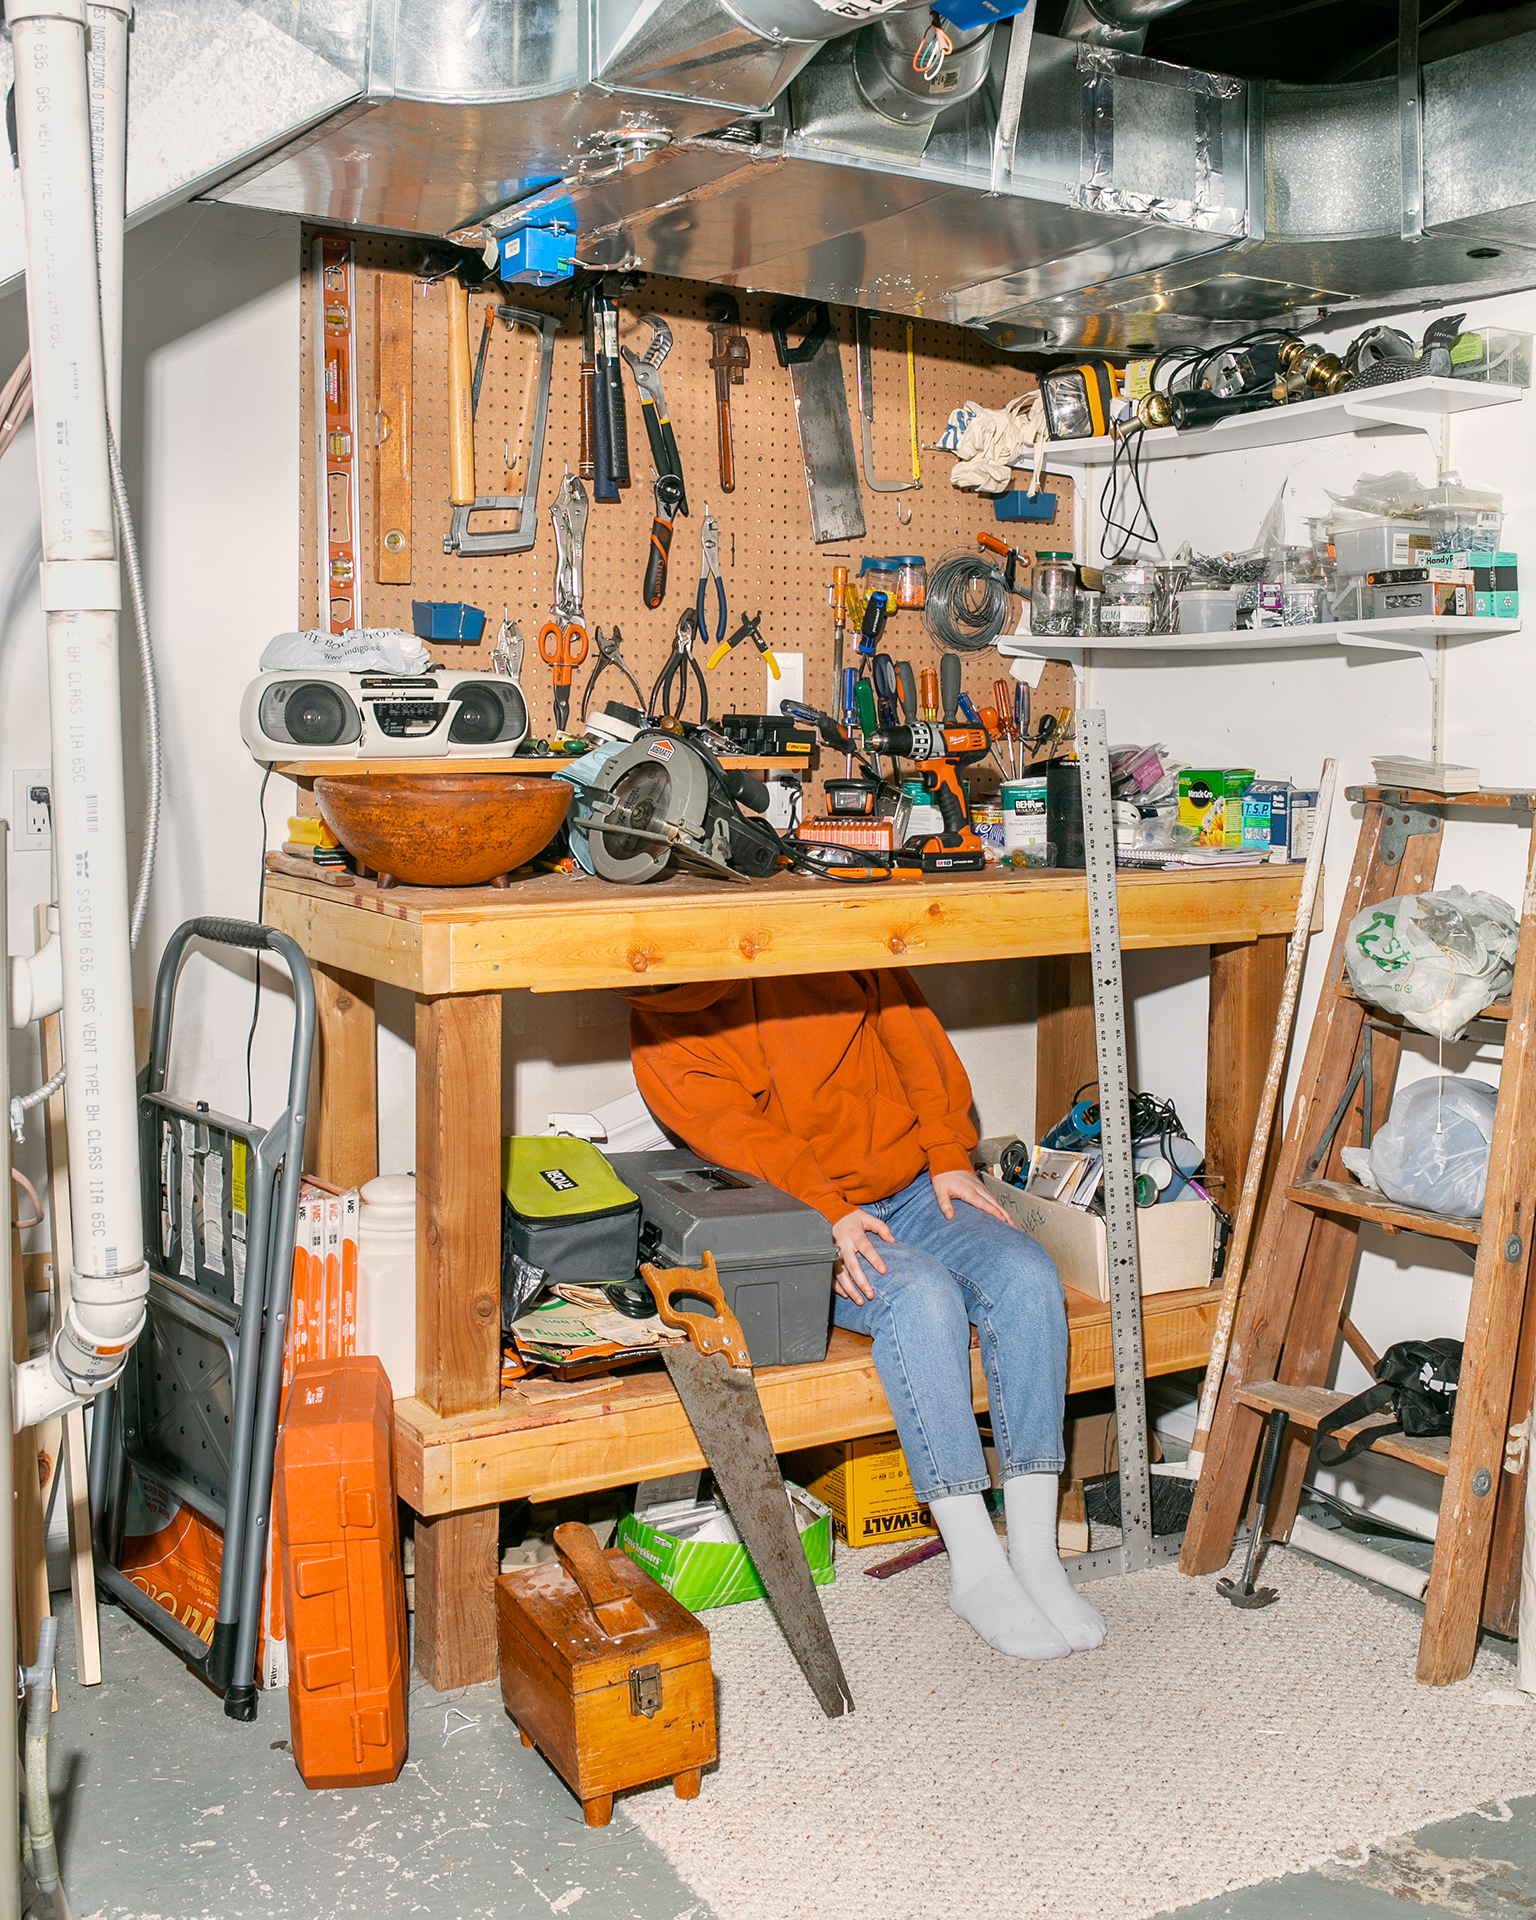 A person sits on a shelf of a wooden workbench, awkwardly hiding their face from view. There are a various tools hanging on the wall about the bench, as well as spread out on the surface of the bench. There is a saw leaning against the shelf on the floor. A metallic vent runs through the top of the frame.